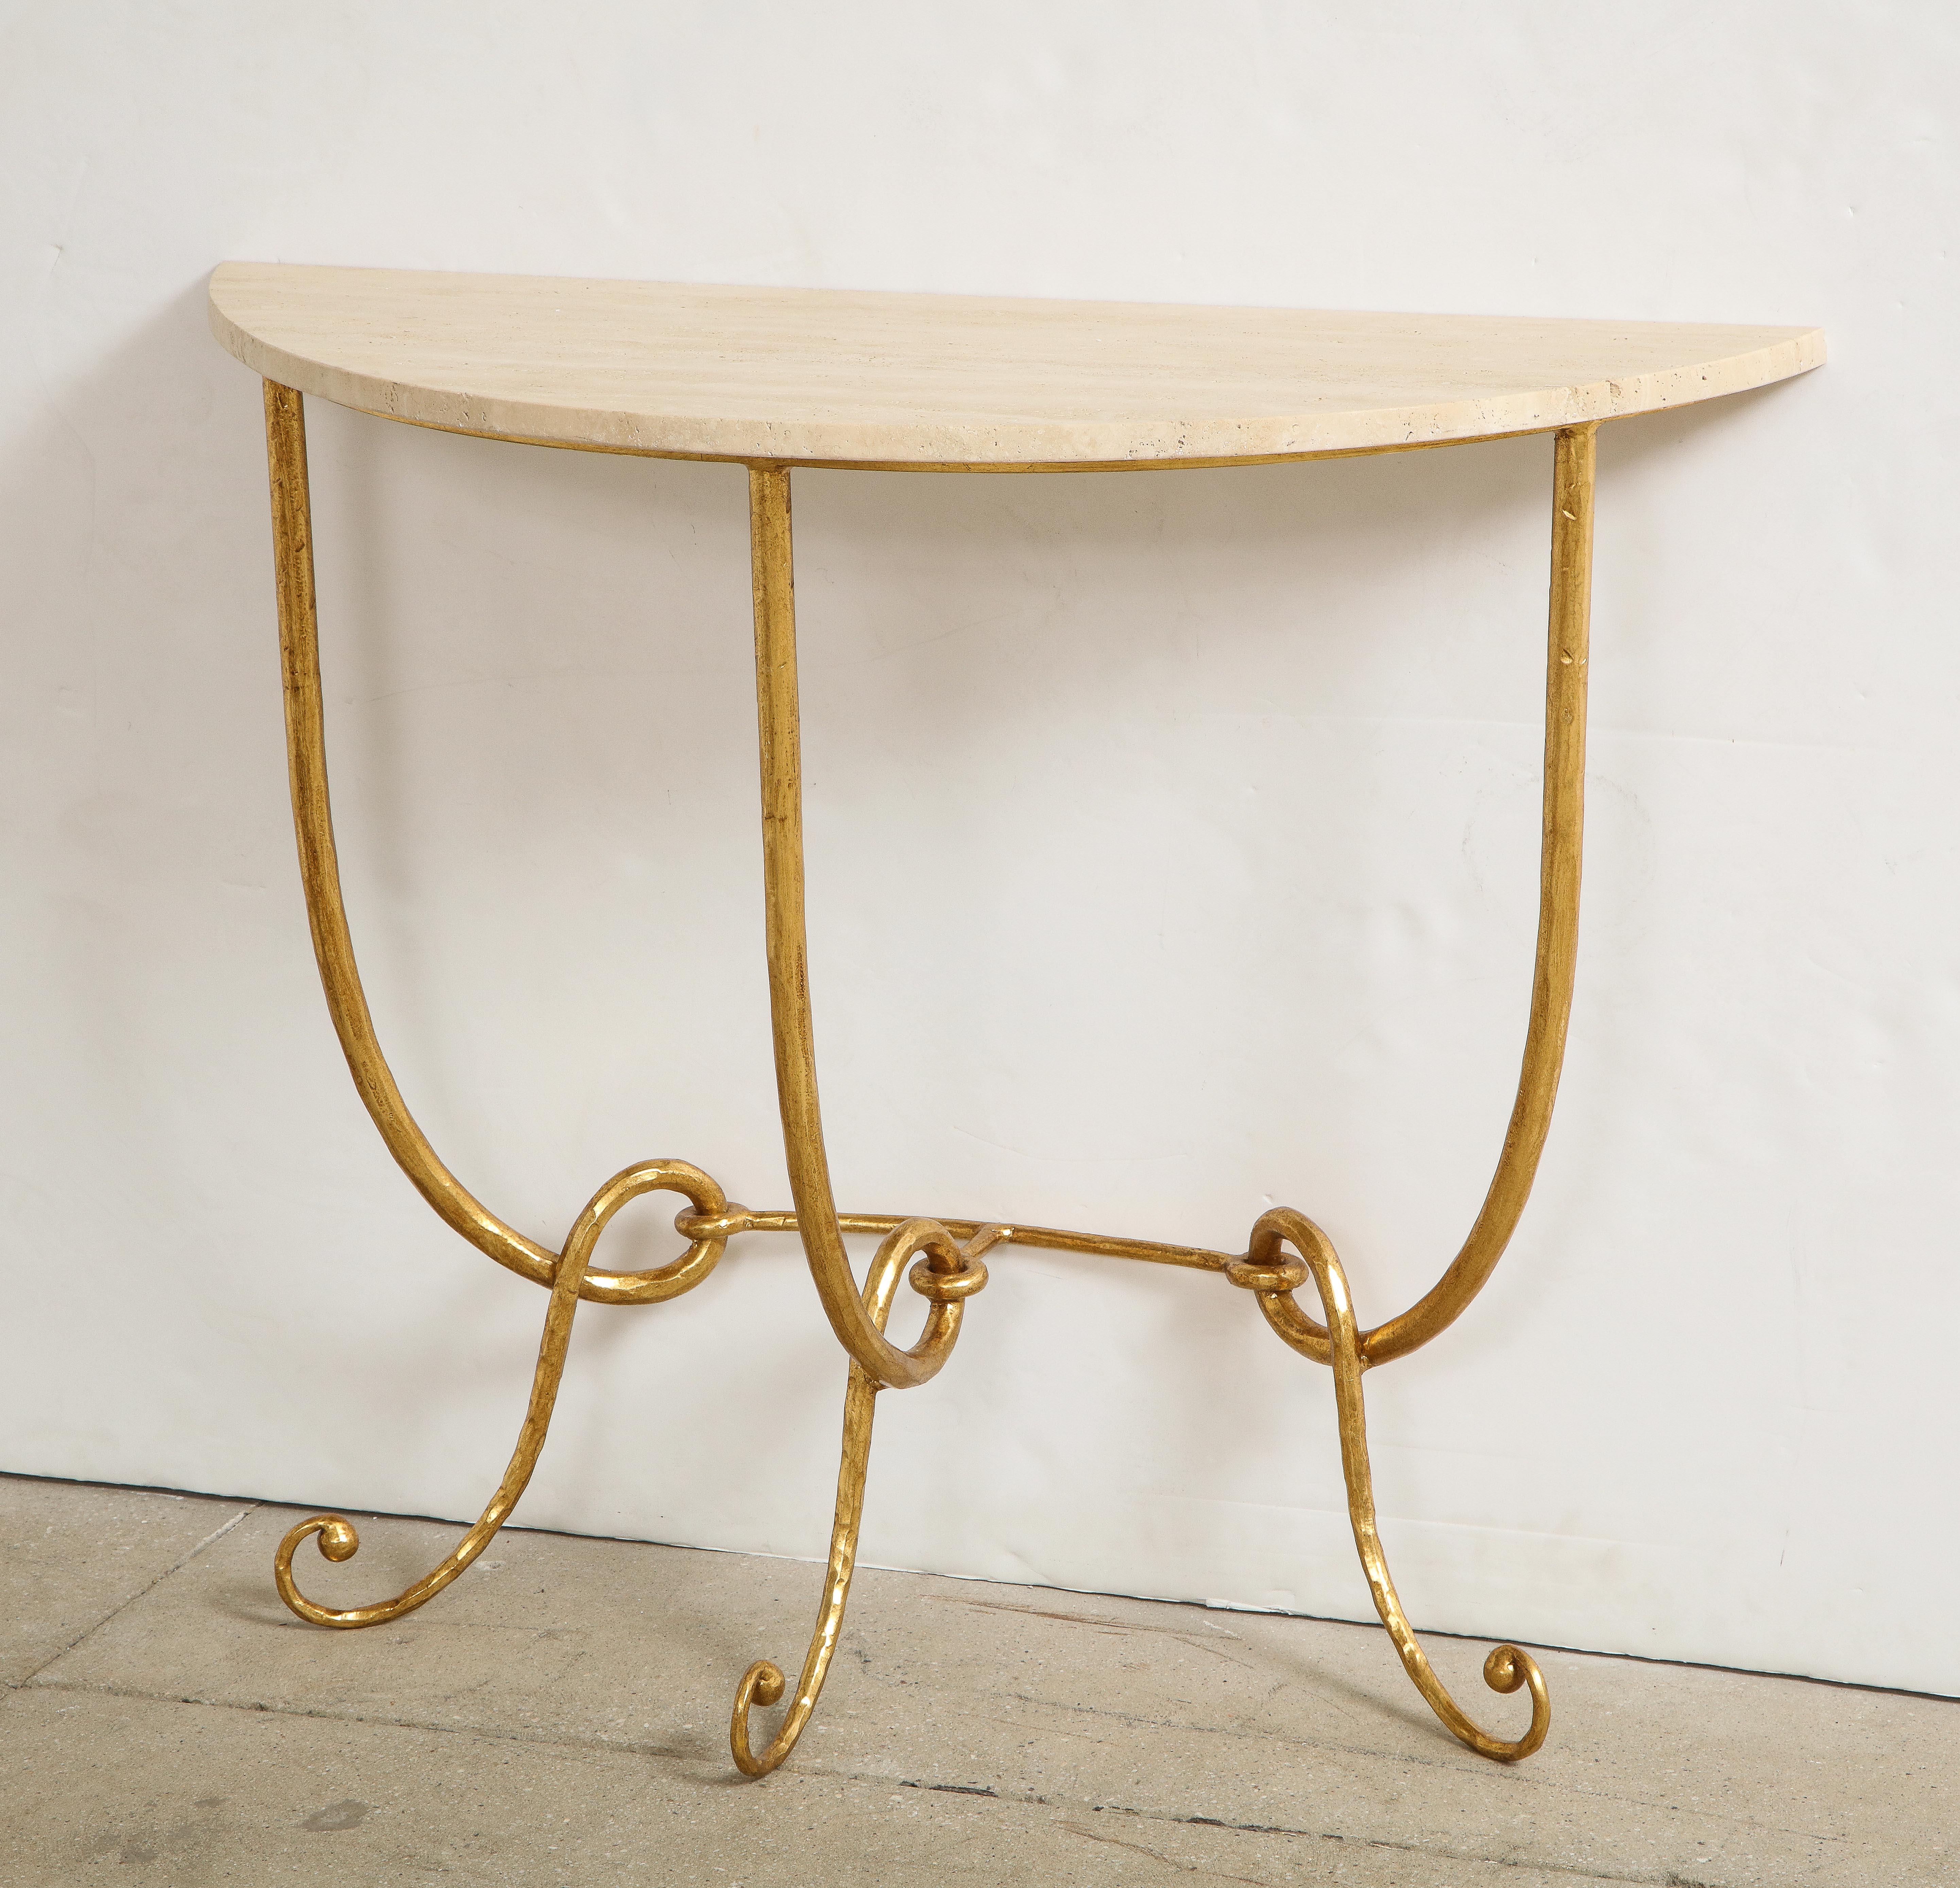 An Italian 1970s gilded iron demilune console table with travertine top. The handcrafted iron having a gilded finish decorated with scrolled legs. The legs are conjoined with a cross stretcher. The organic travertine provides a wonderful contrast